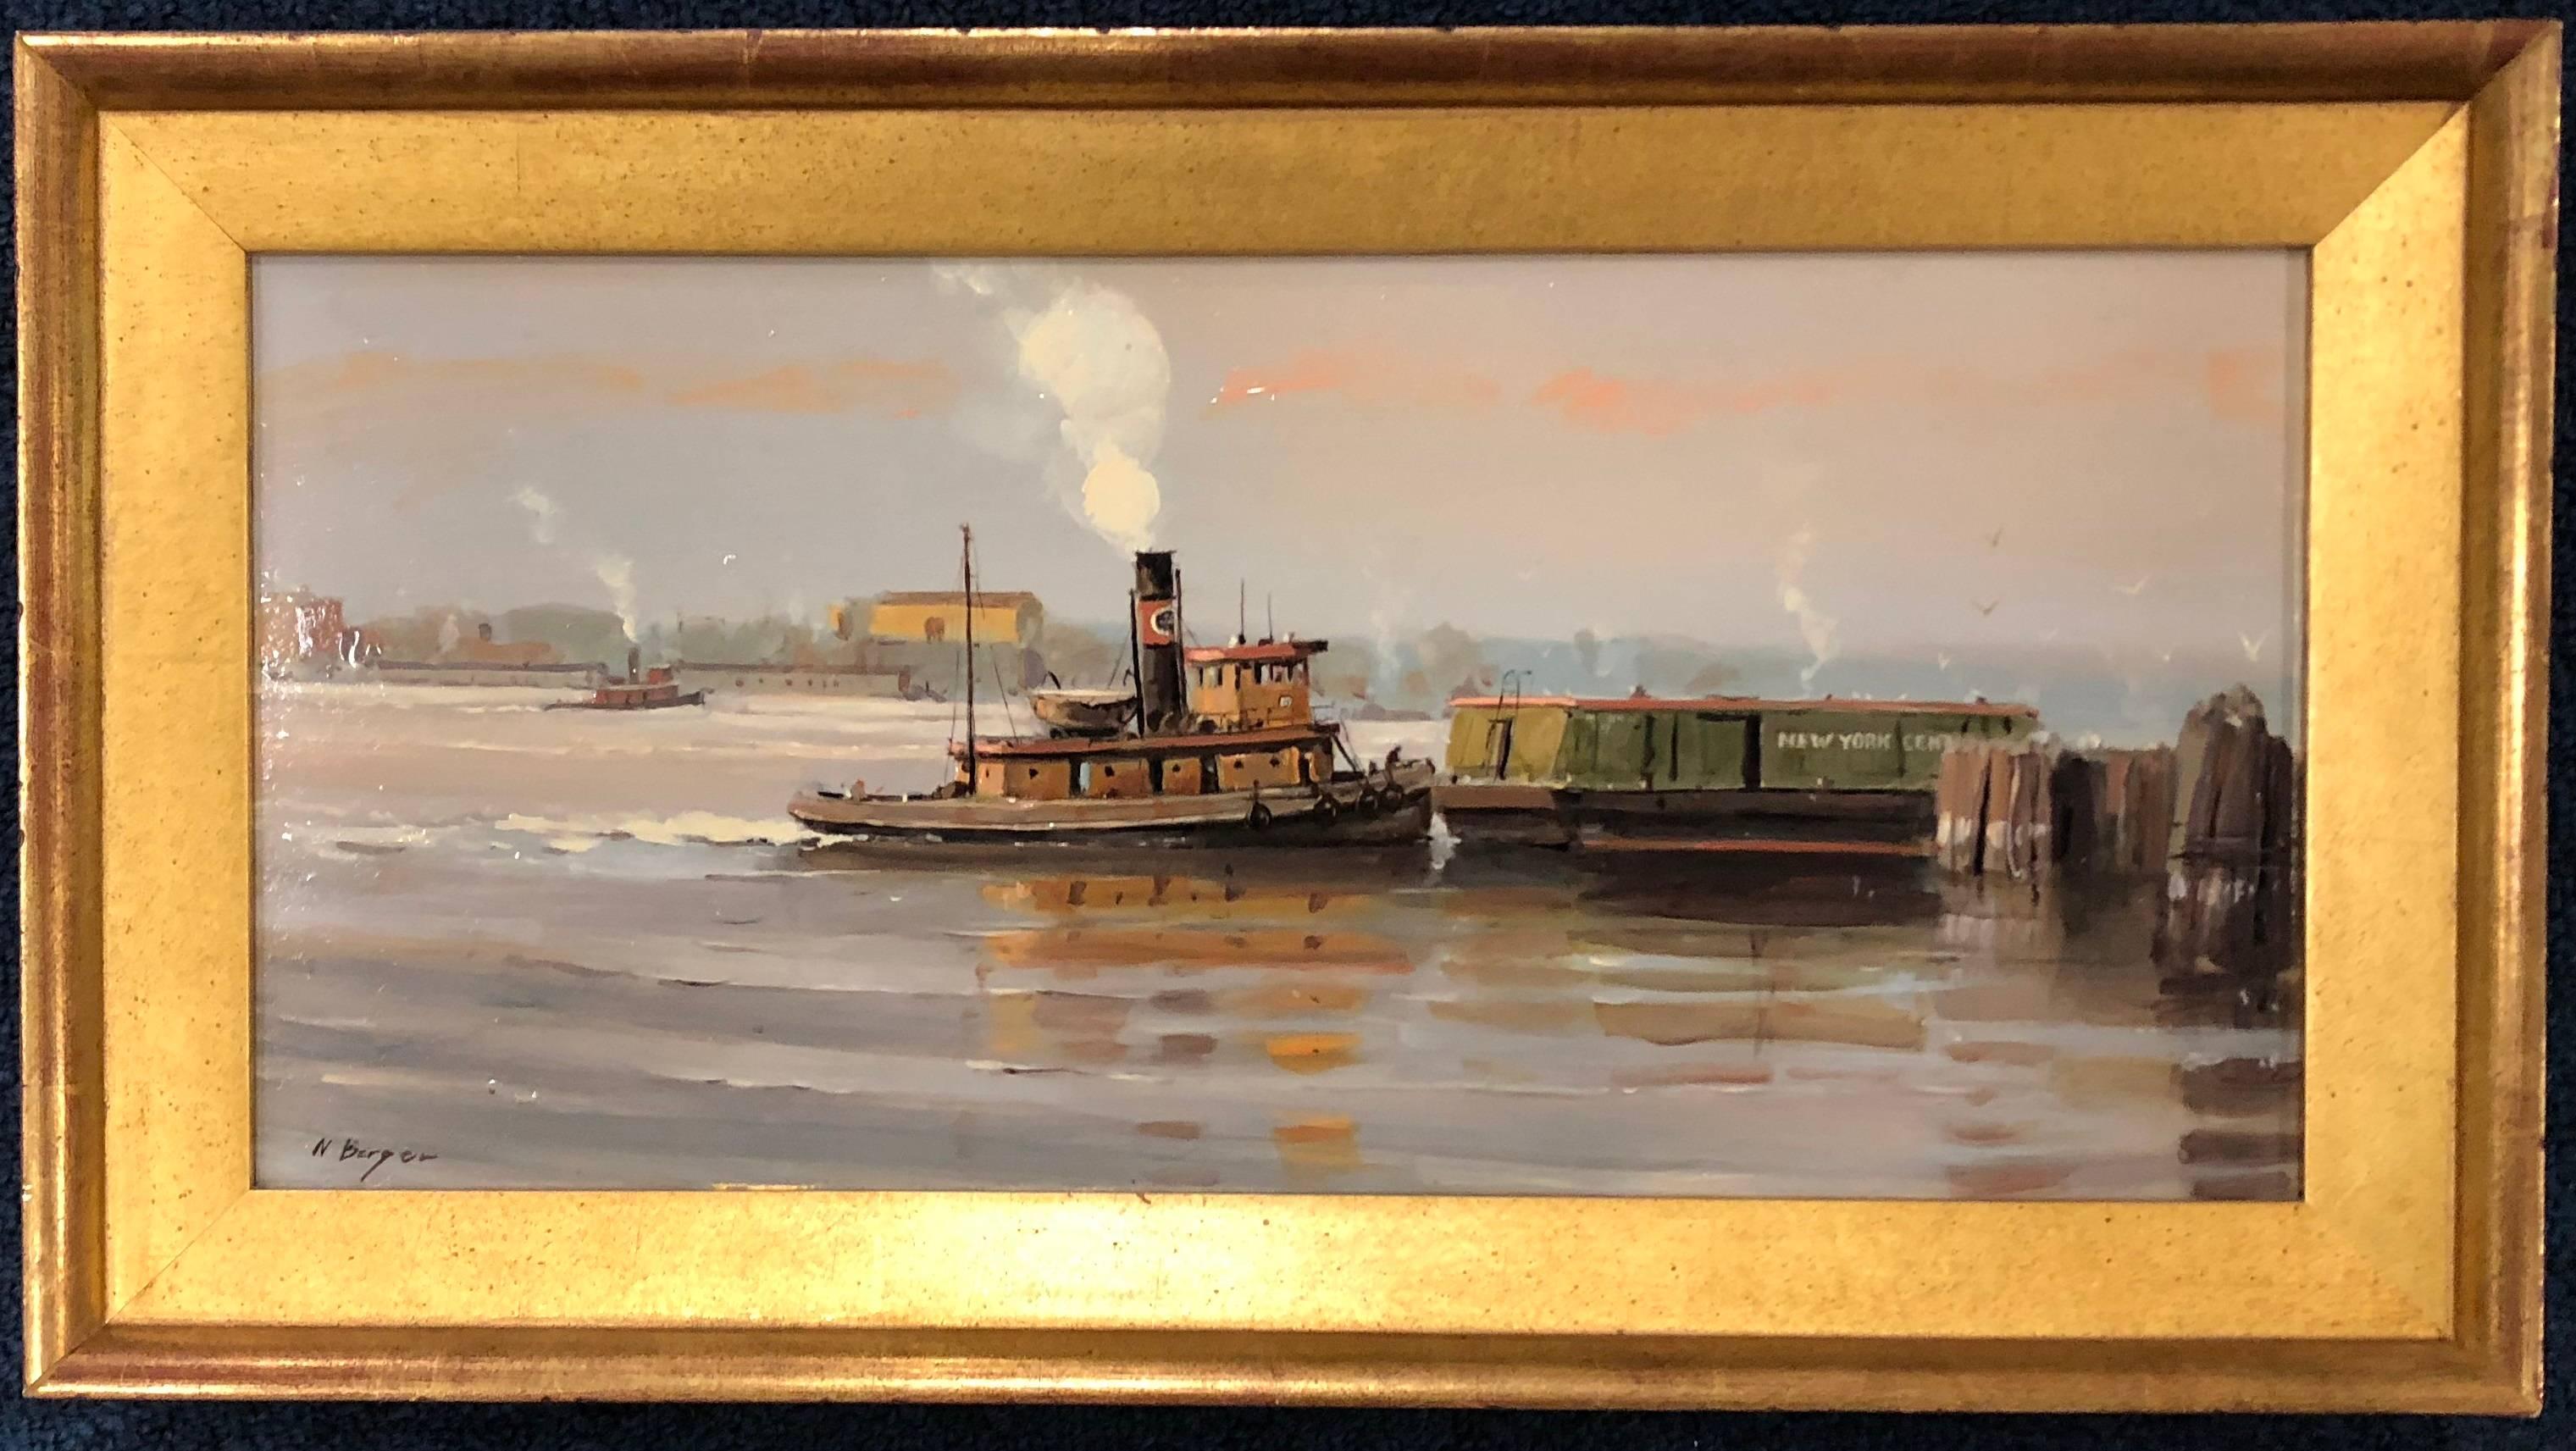 Easing In, New York Central Tug - Painting by Nicholas Berger